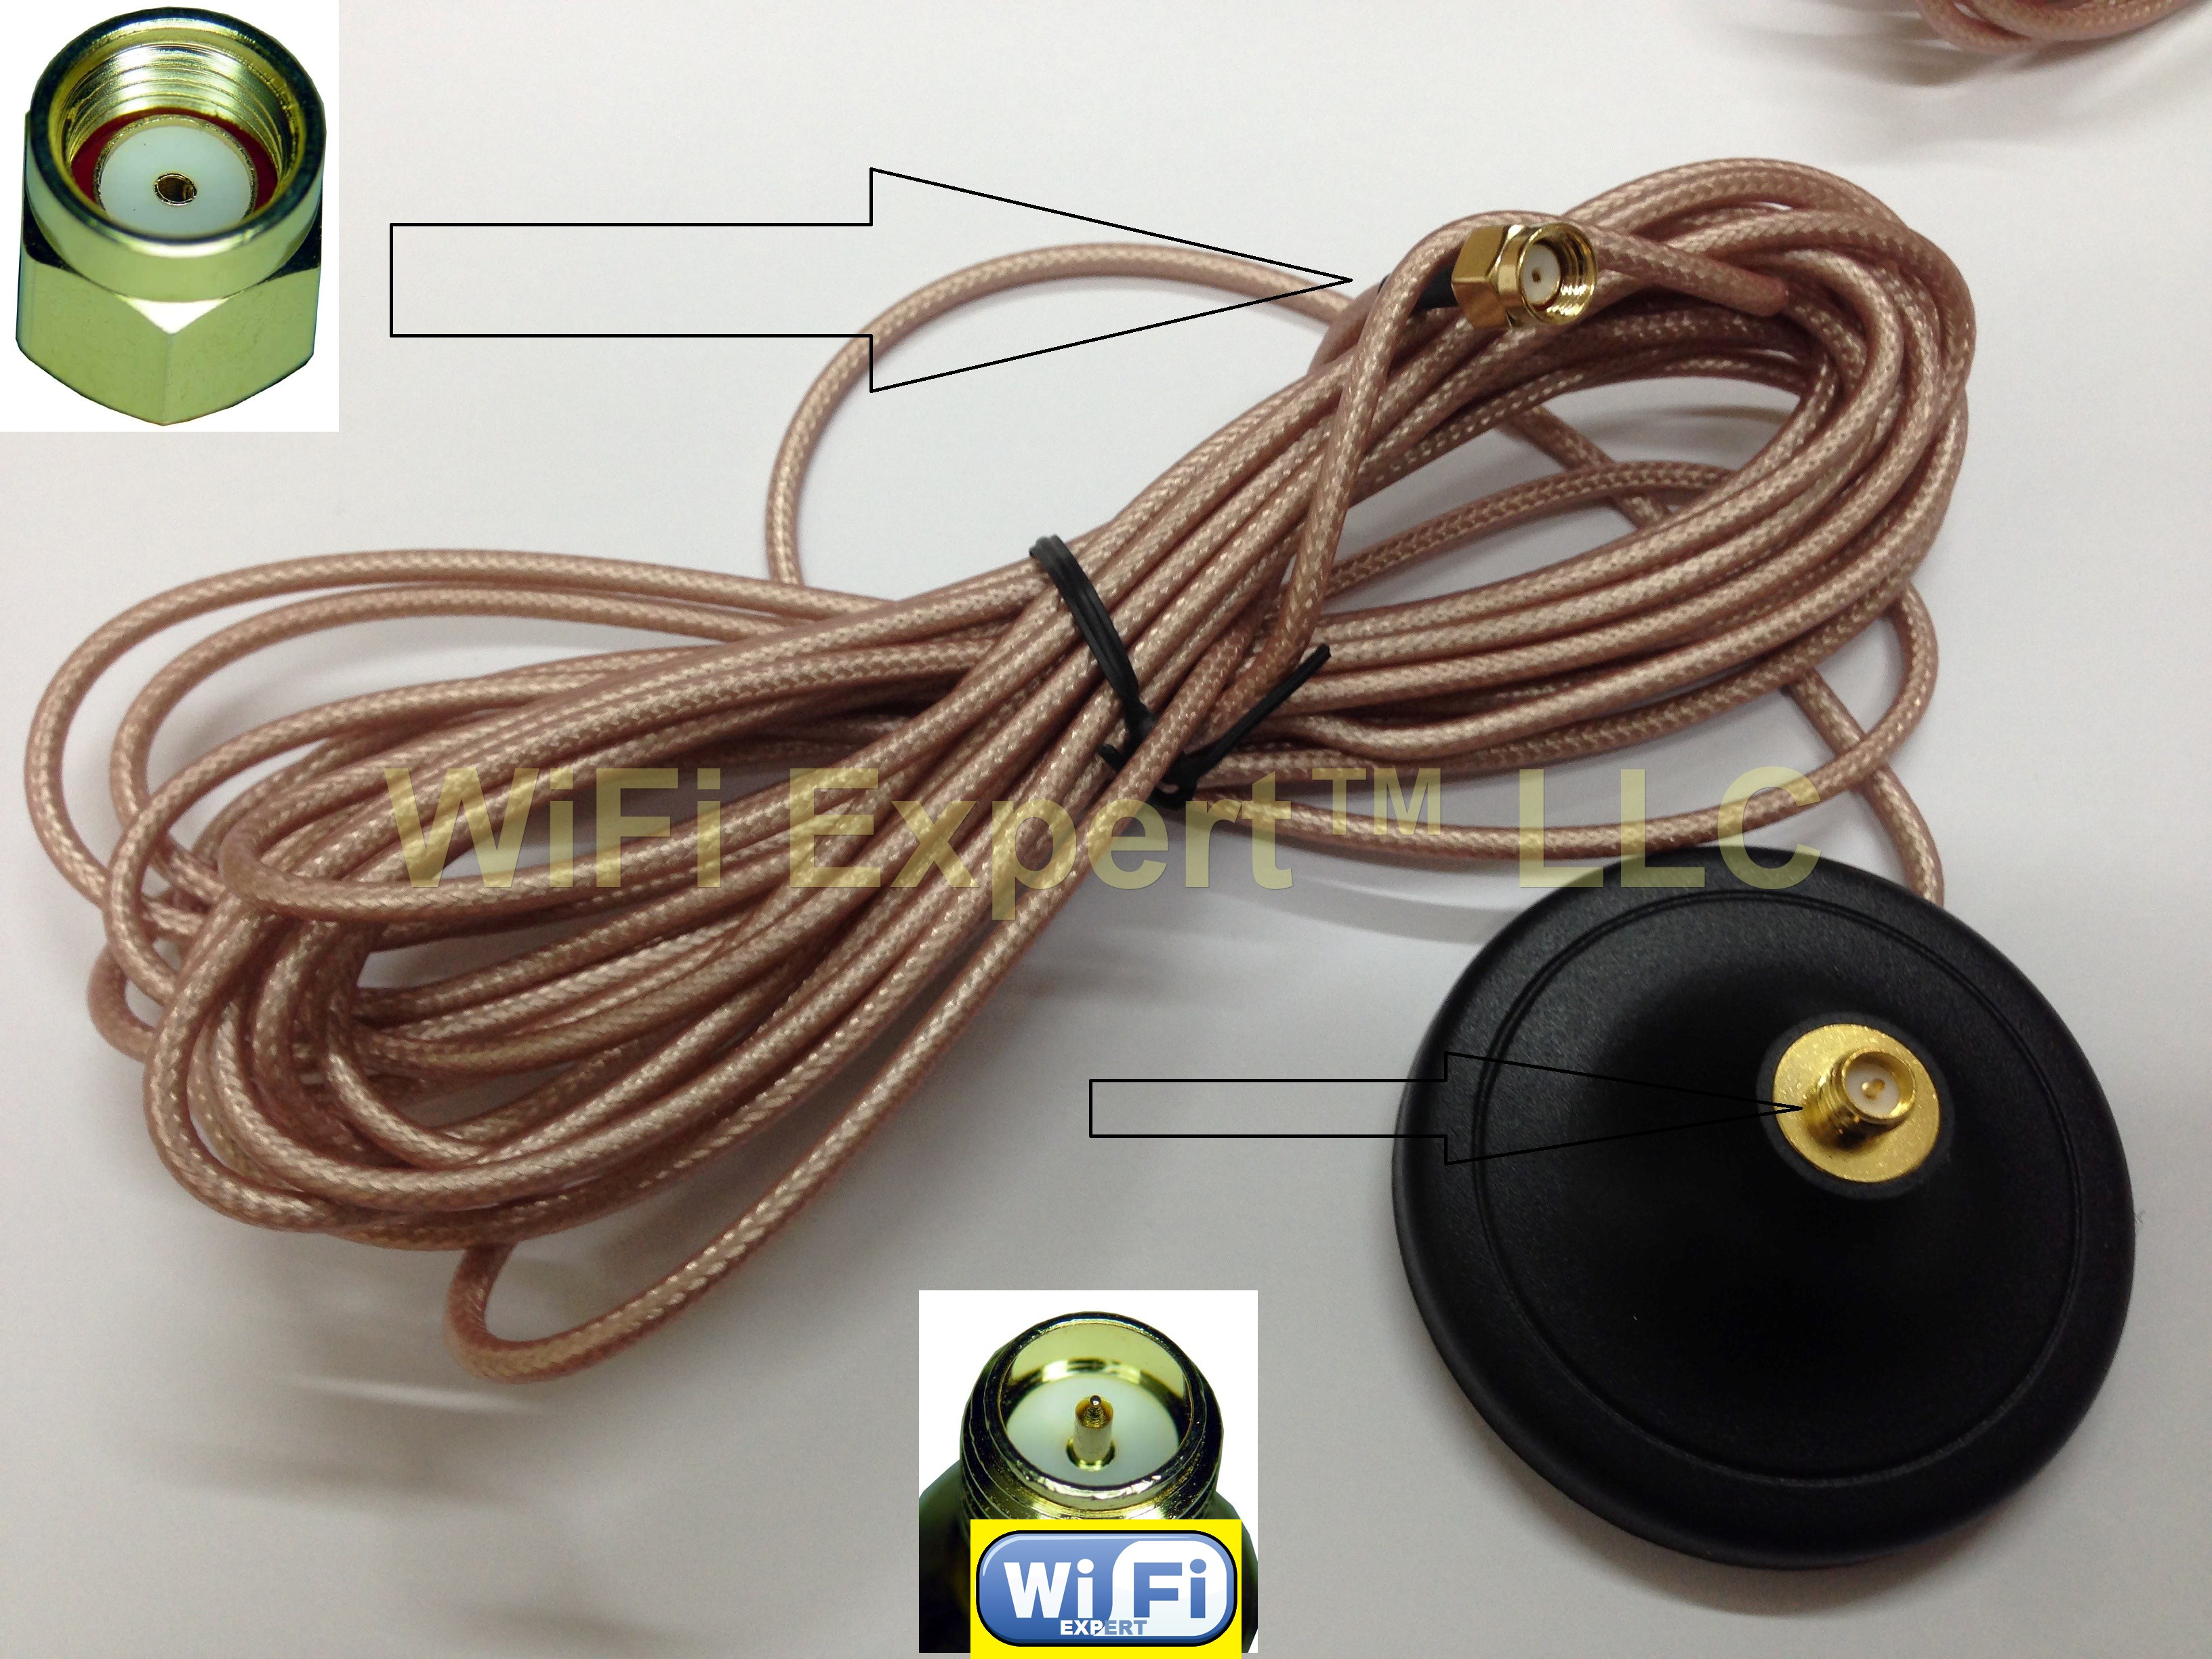 15dBi WiFi Antenna with Magnetic Base RP-SMA 10 Foot RG316DS Extension Cable USA 